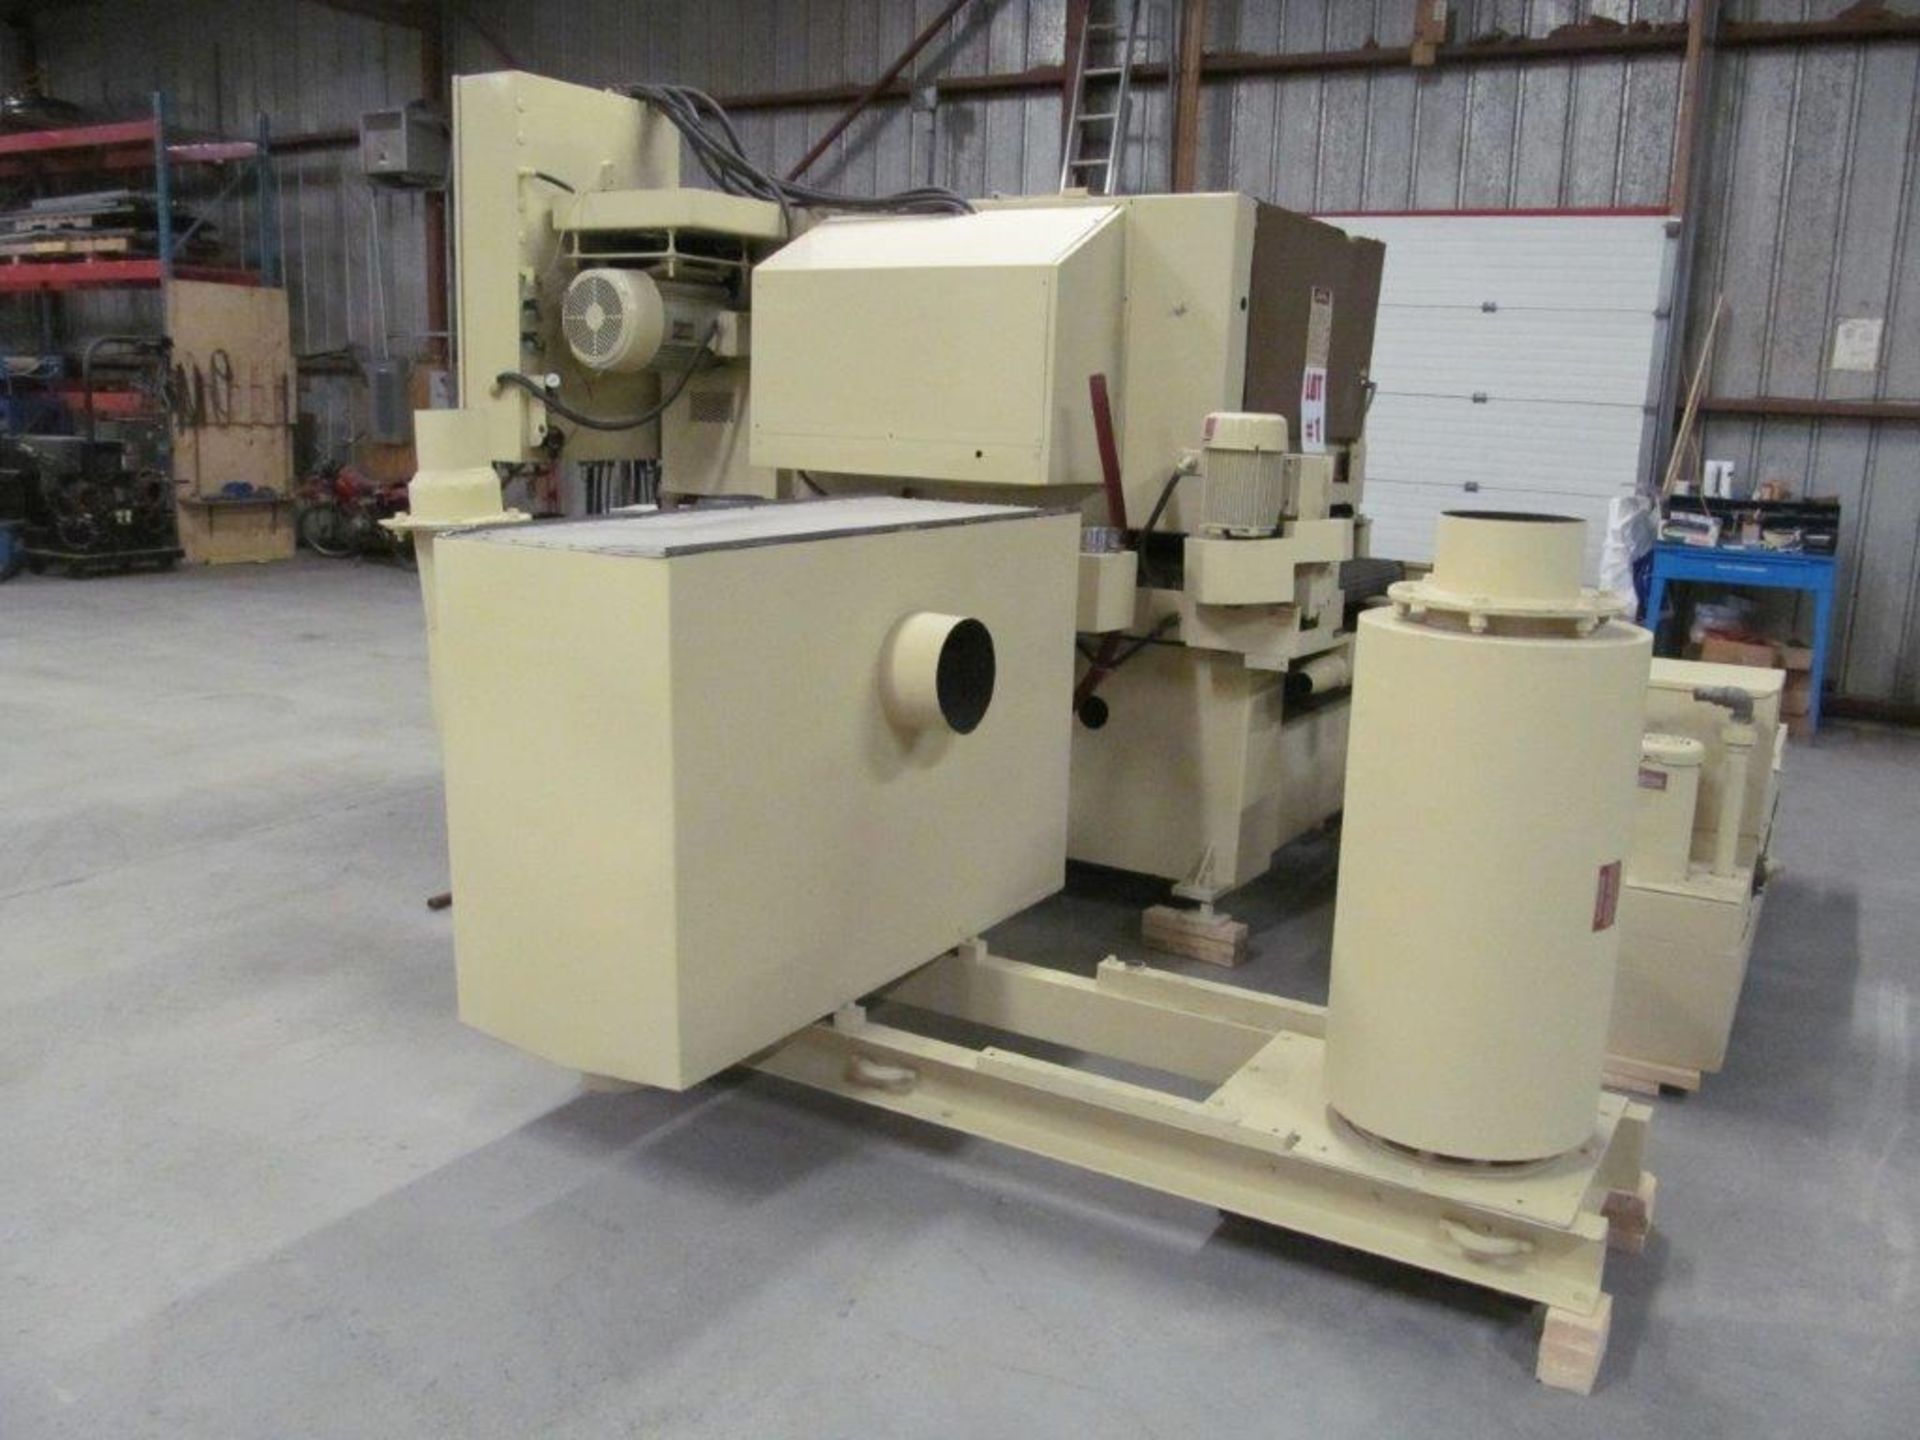 TIMESAVER MODEL 237-2CMPLW, S/N: 19989, 36" WIDE MATERIAL WET TYPE, ELECTRICS: 575 V / 3PH / 60C, - Image 5 of 14